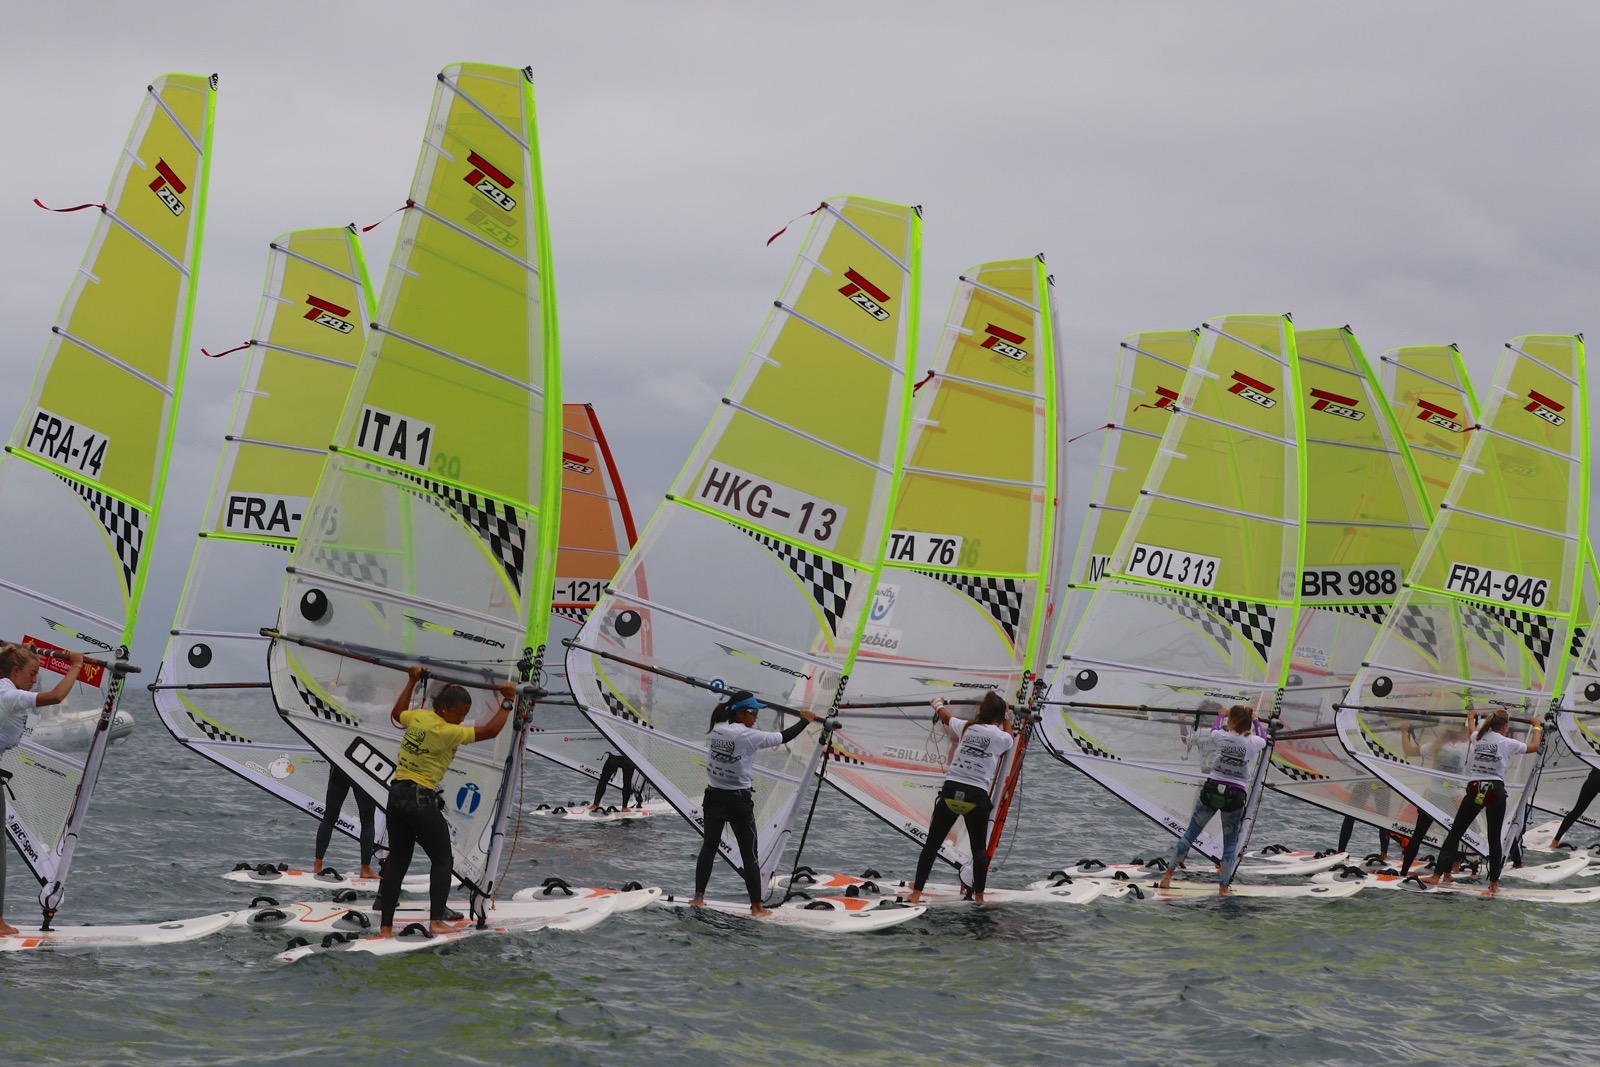  Windsurfing  Techno293+  World Championship 2017  Quiberon FRA  Day 3, another 3 races in up to 20 kn winds